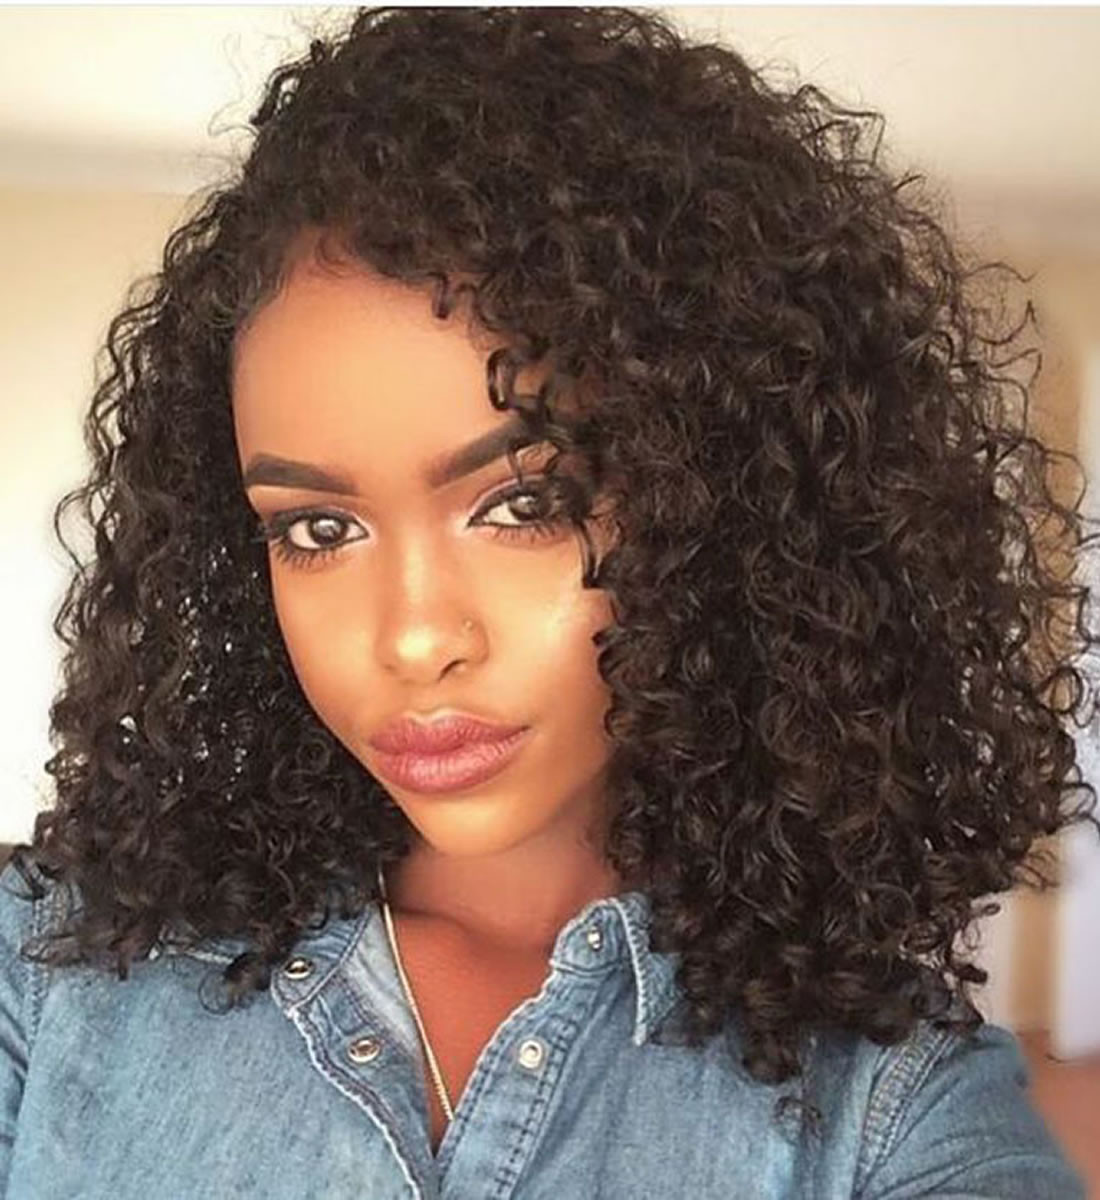 Black Natural Curly Hairstyles For Medium Length Hair
 Black Women Medium Lenght Curly Hairstyles 2018 2019